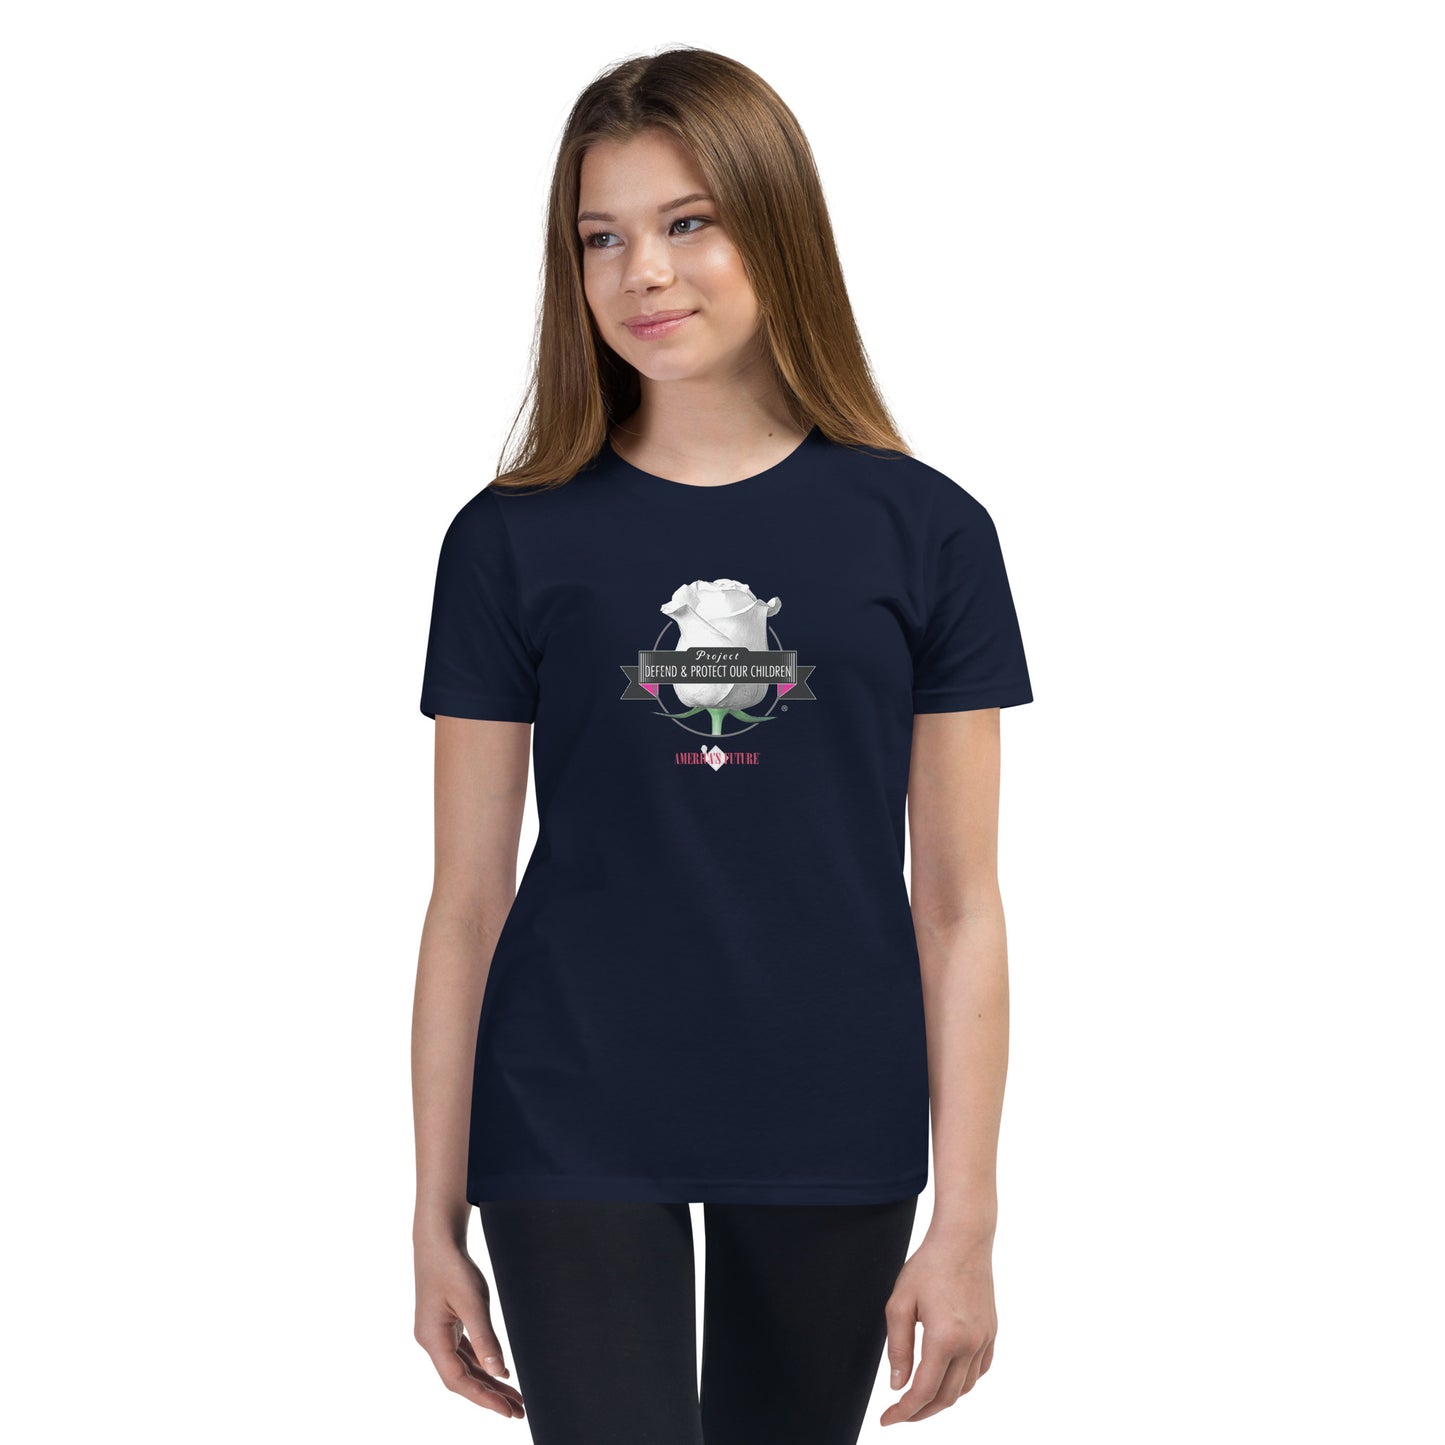 Project Defend & Protect Our Children - Youth Short Sleeve T-Shirt